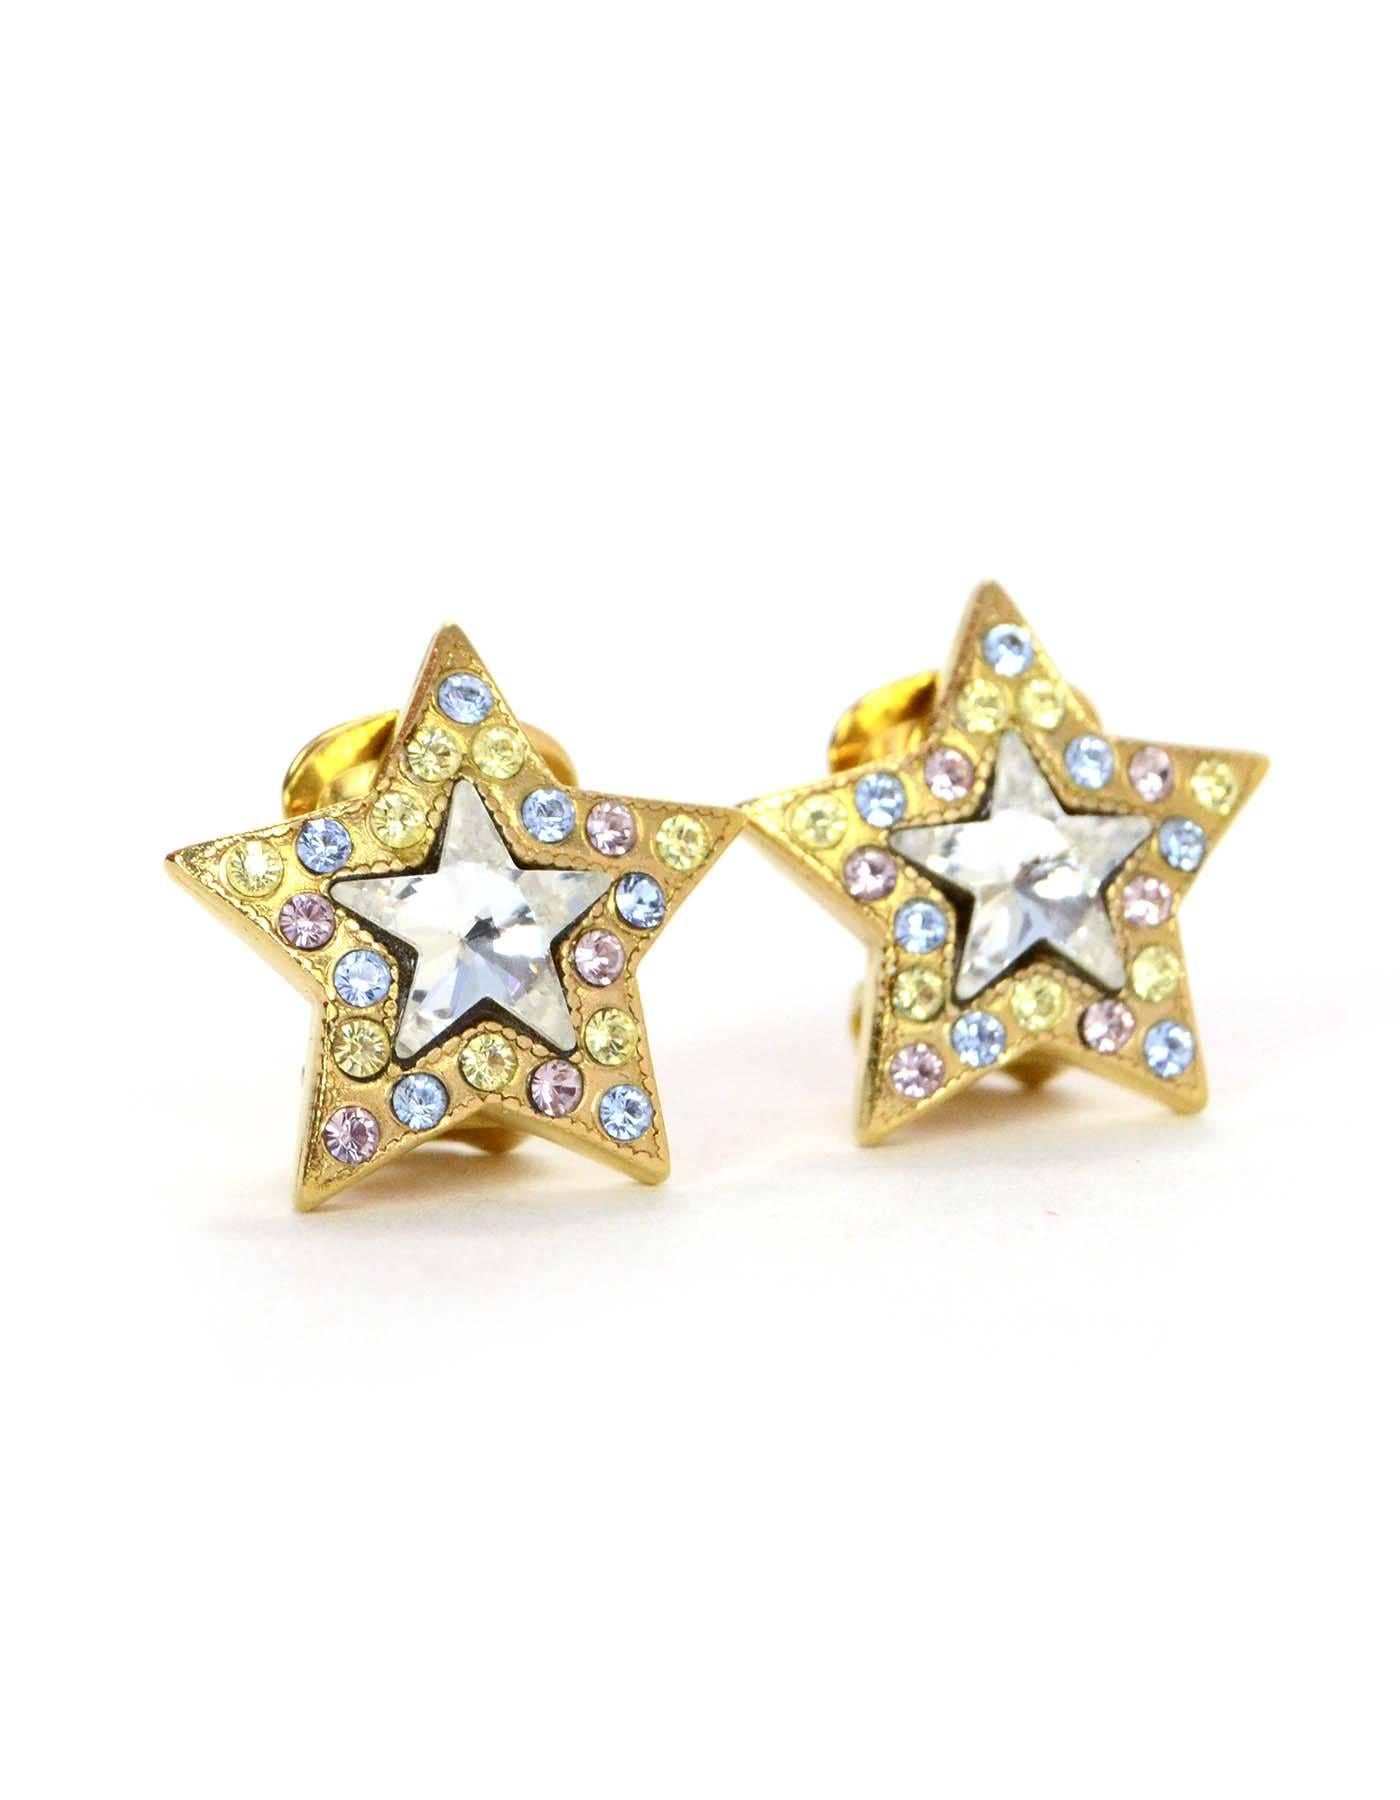 Salvatore Ferragamo Crystal Star Earrings

Made In: Italy
Color: Goldtone and clear
Materials: Crystals and metal
Closure: Clip-on
Date Codes/Stamp: Ferragamo Made In Italy
Overall Condition: Excellent pre-owned condition with the exception